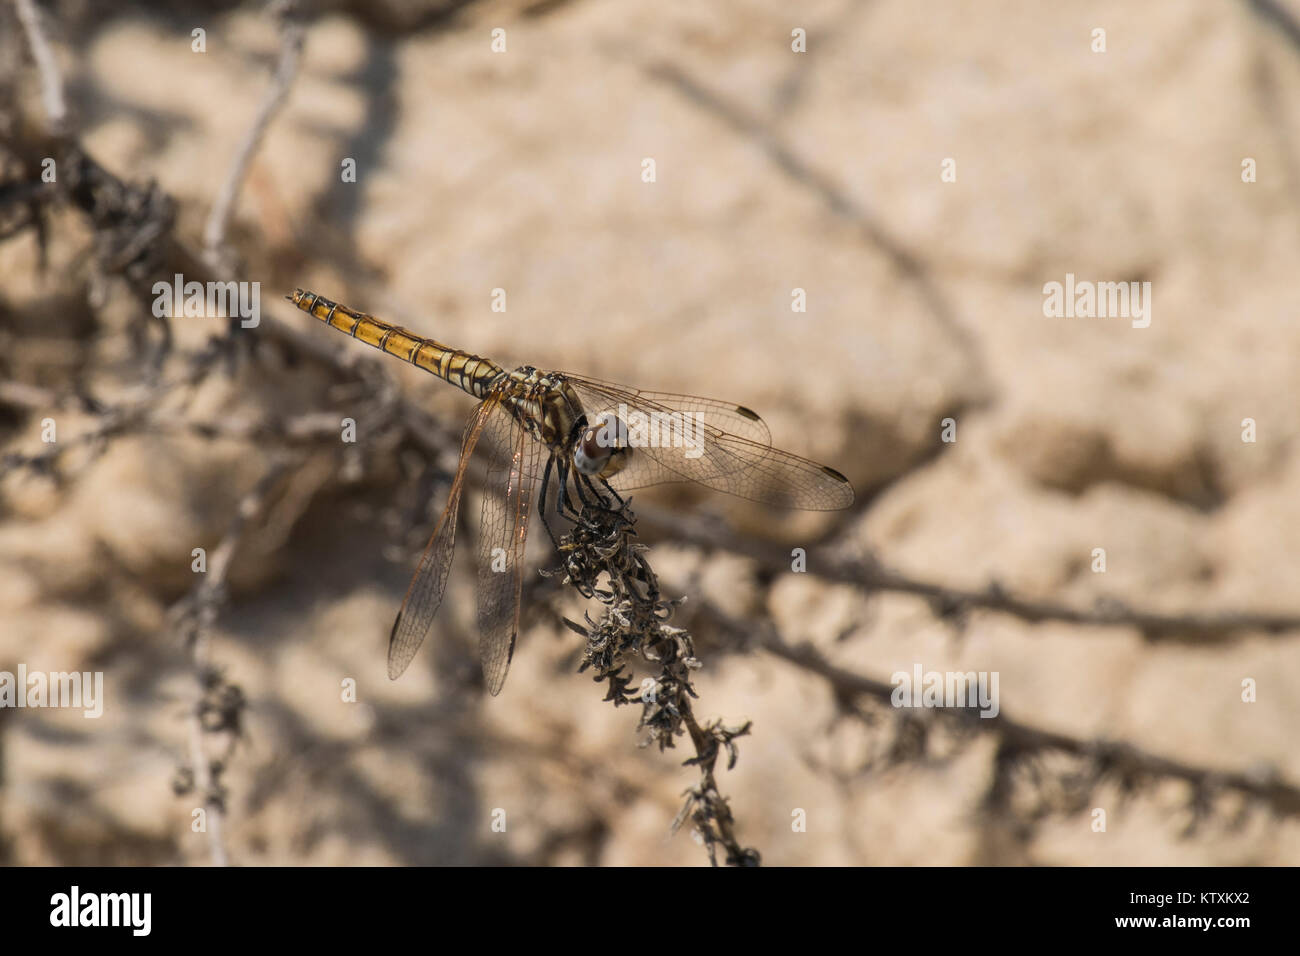 Dragonfly on dried flower Stock Photo